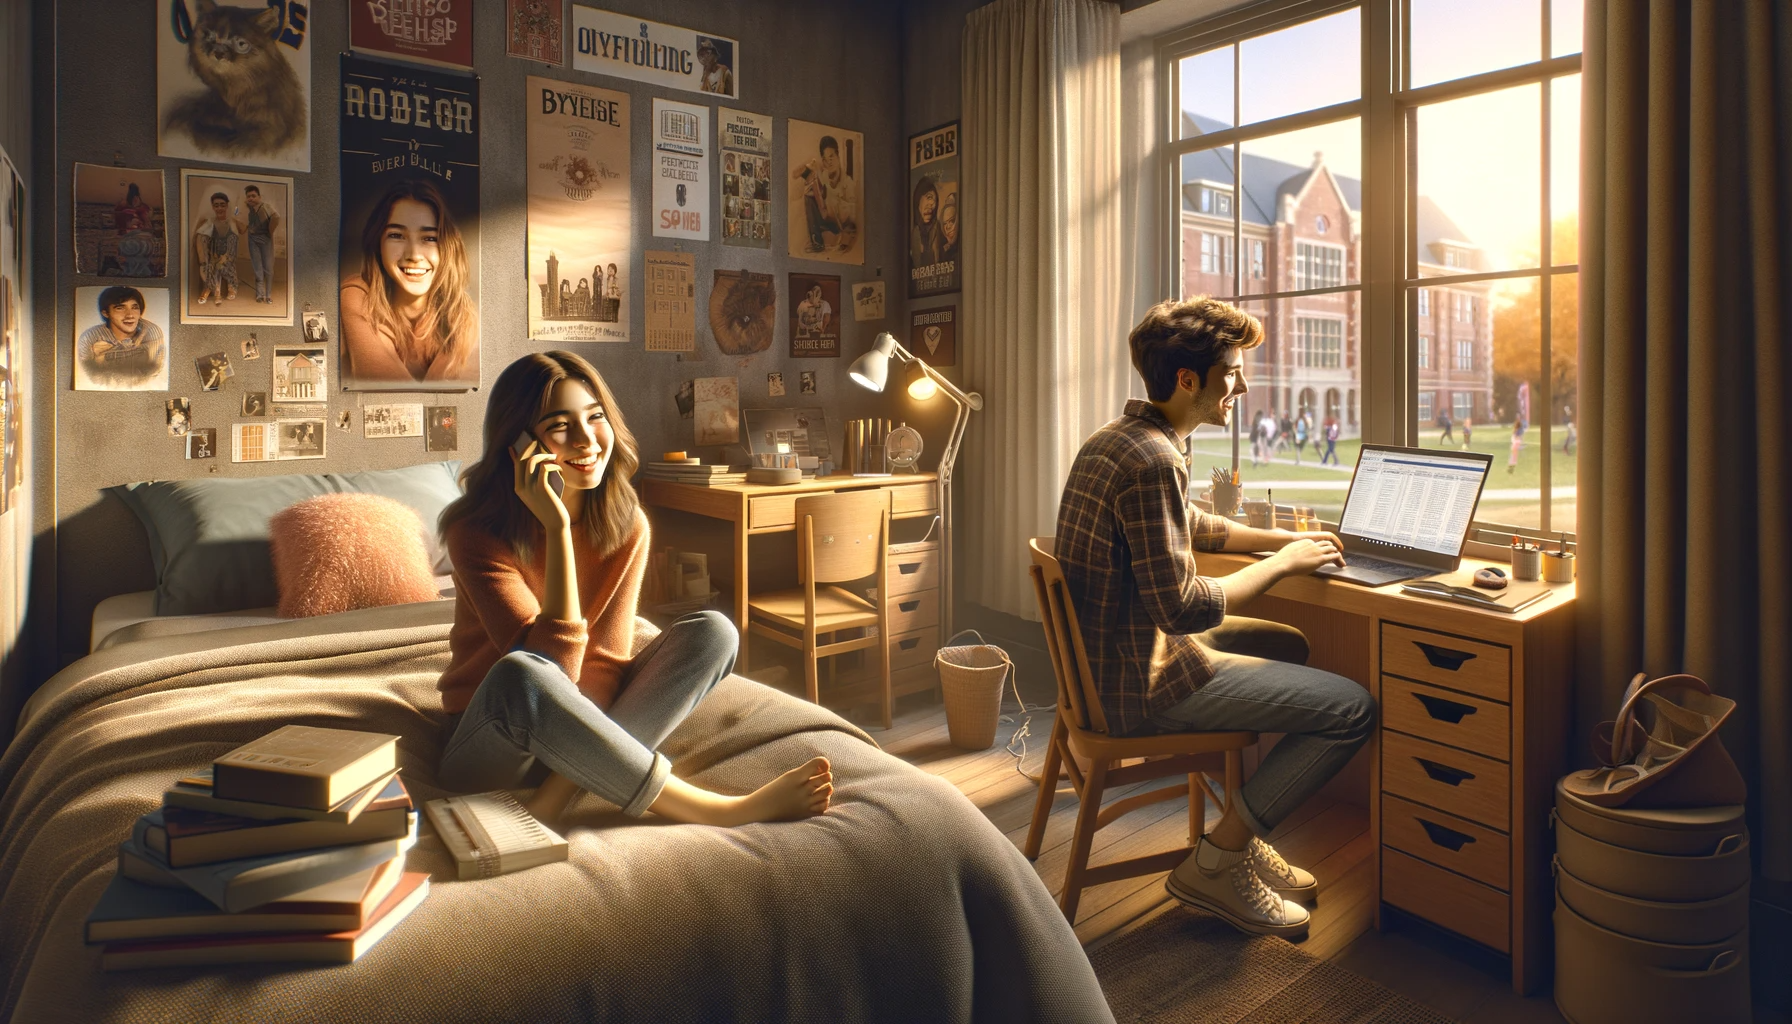 A college dorm room decorated with posters, a small bed, a desk with a laptop and books, and a cozy chair.